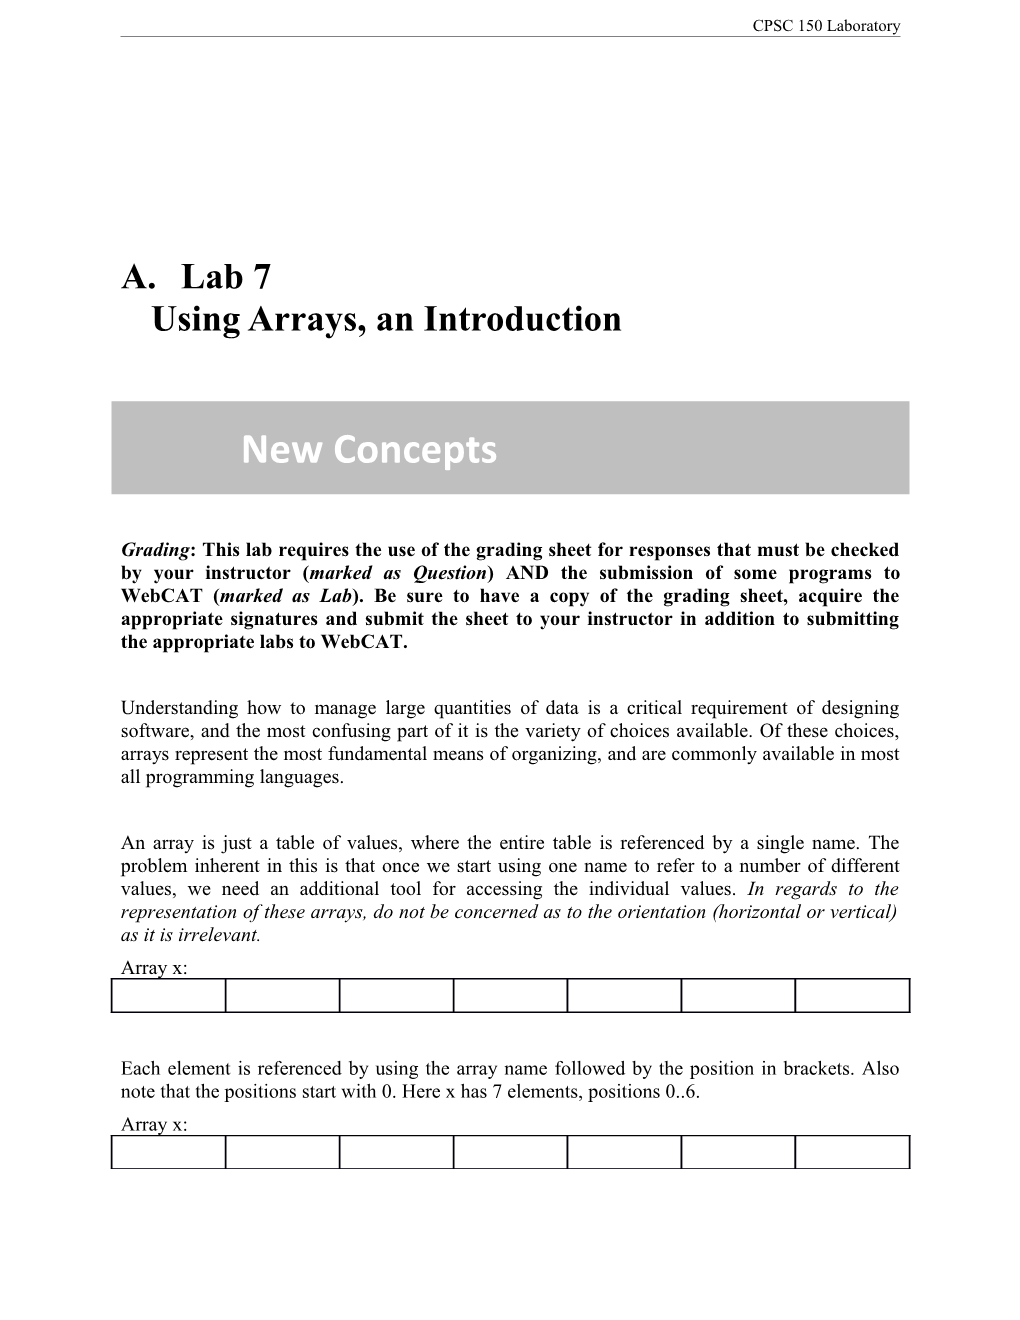 Lab 7Using Arrays, an Introduction